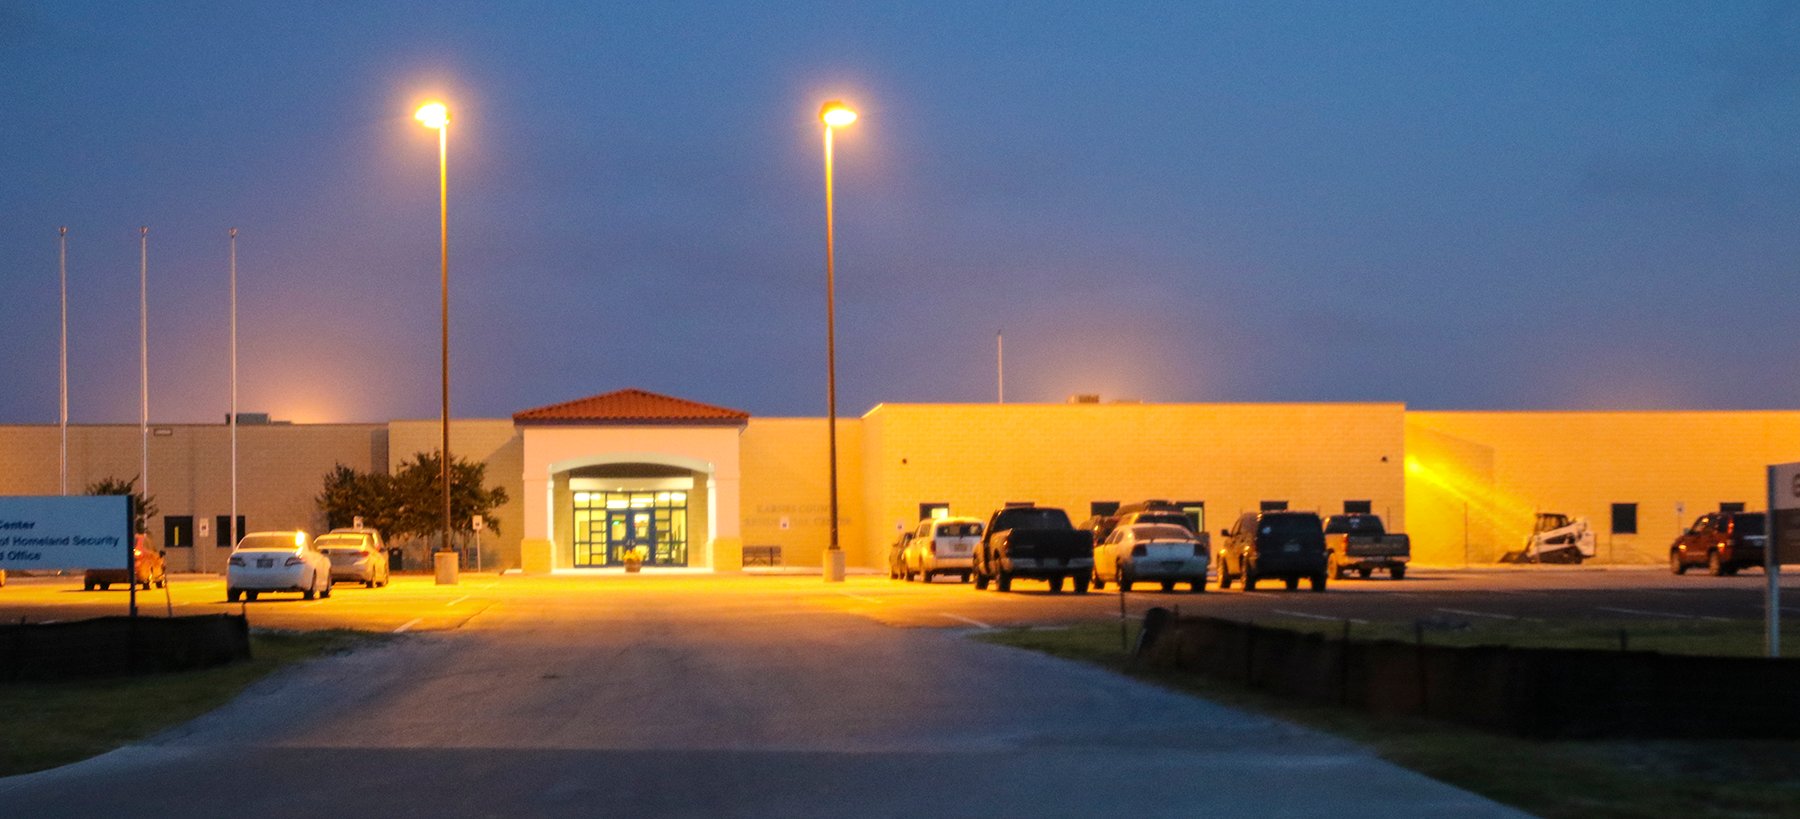 The Karnes County Residential Center is the first immigrant detention facility in Texas to be licensed as a child care provider.